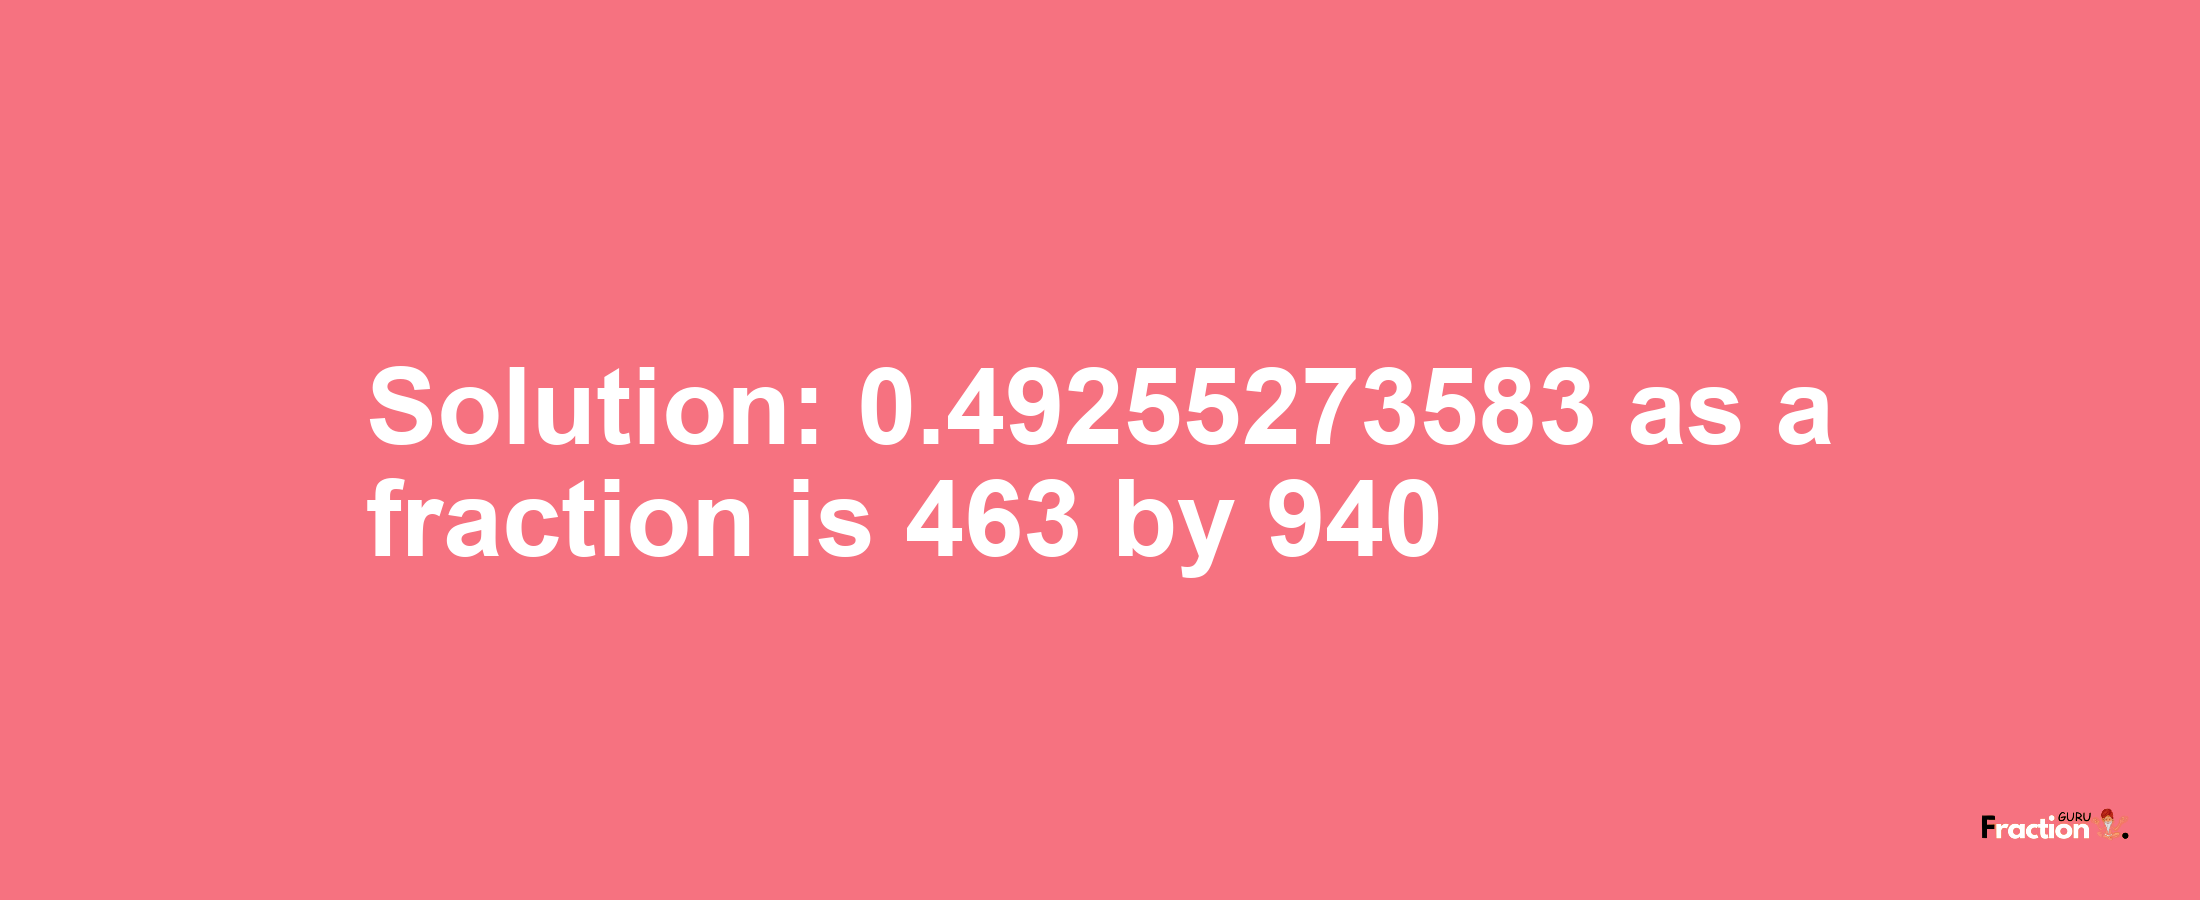 Solution:0.49255273583 as a fraction is 463/940